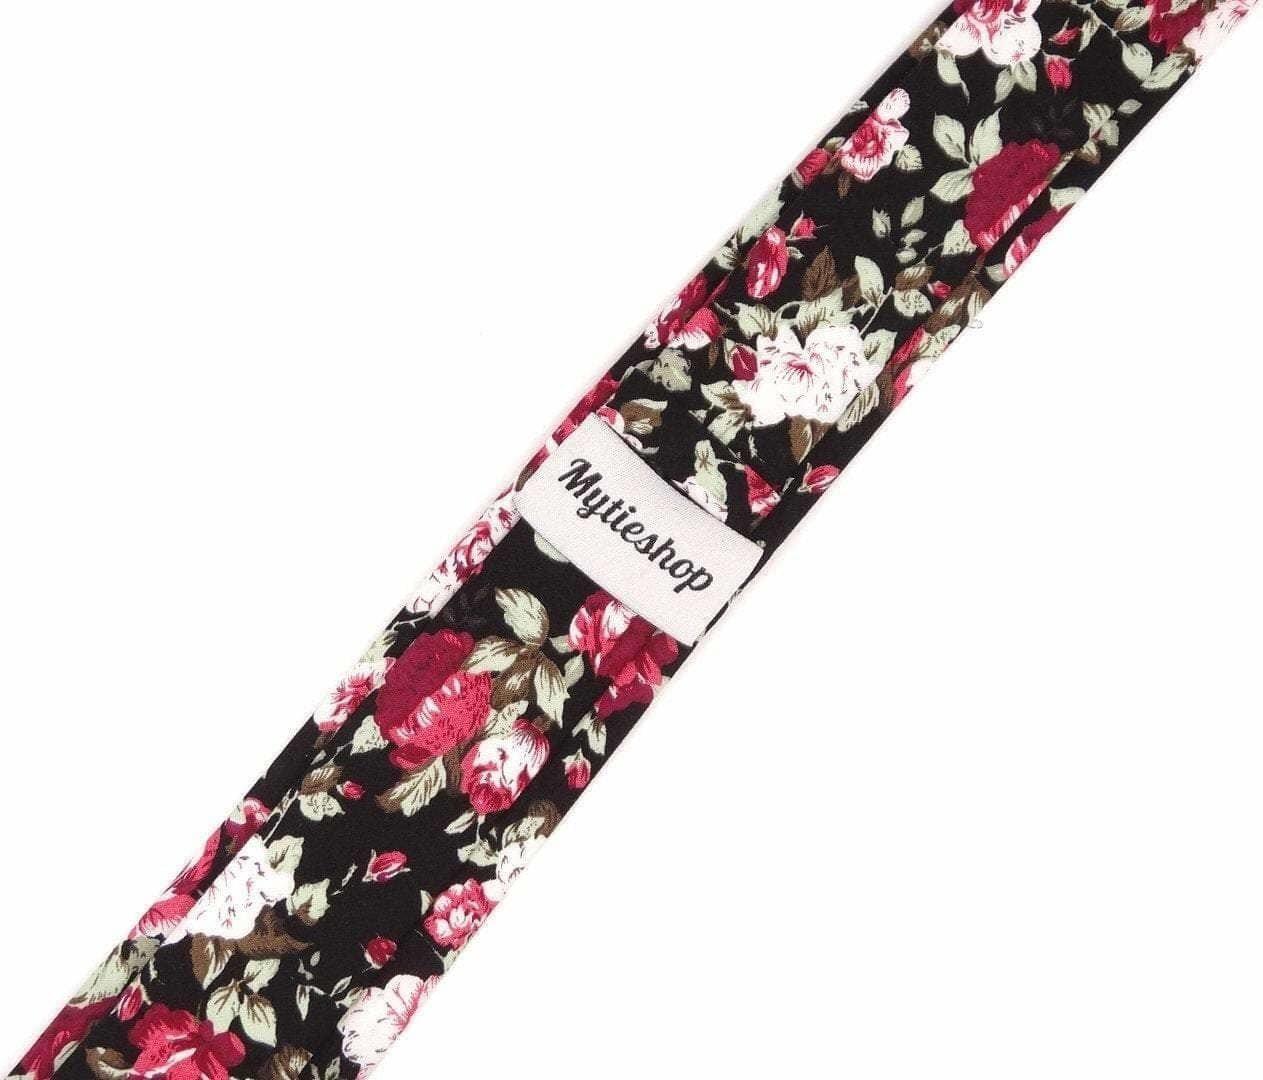 Floral Skinny Tie 2.36” HUGO-Neckties-Floral Skinny Tie Men’s Floral Necktie for weddings and events, great for prom and anniversary gifts. Mens floral ties near me us ties tie shops cool ties-Mytieshop. Skinny ties for weddings anniversaries. Father of bride. Groomsmen. Cool skinny neckties for men. Neckwear for prom, missions and fancy events. Gift ideas for men. Anniversaries ideas. Wedding aesthetics. Flower ties. Dry flower ties.